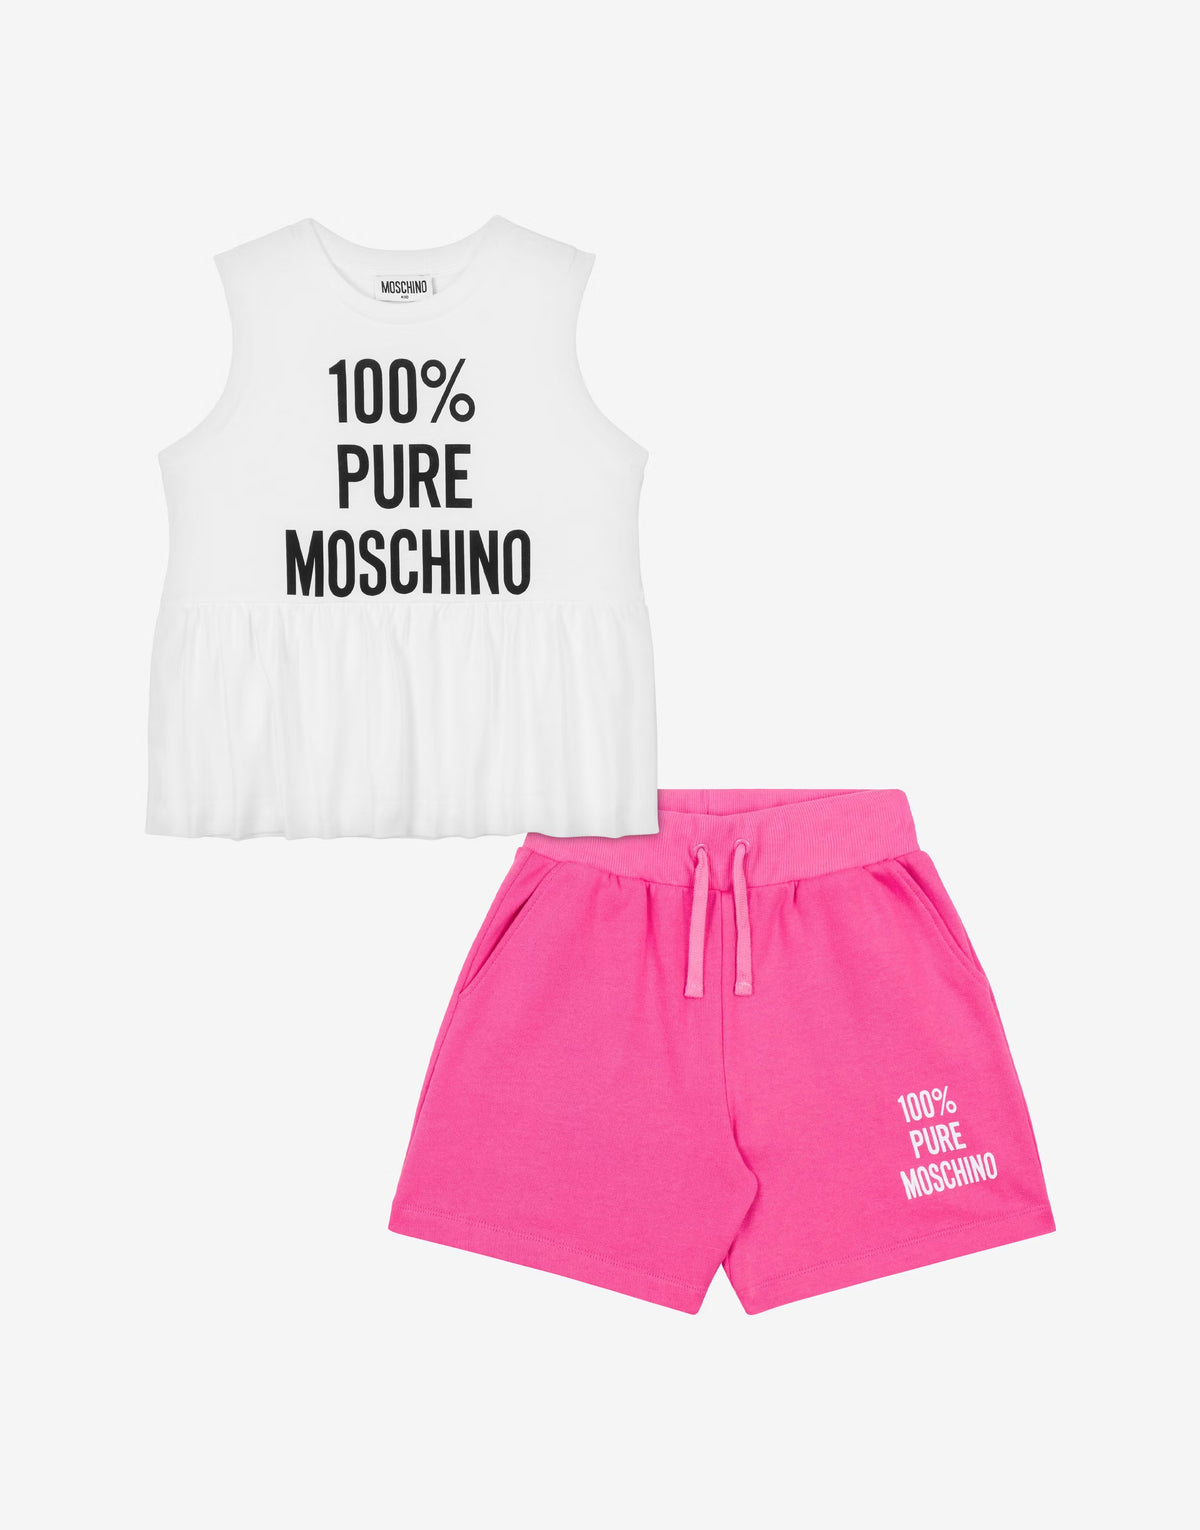 100% PURE MOSCHINO TOP AND SHORTS CO-ORD SET